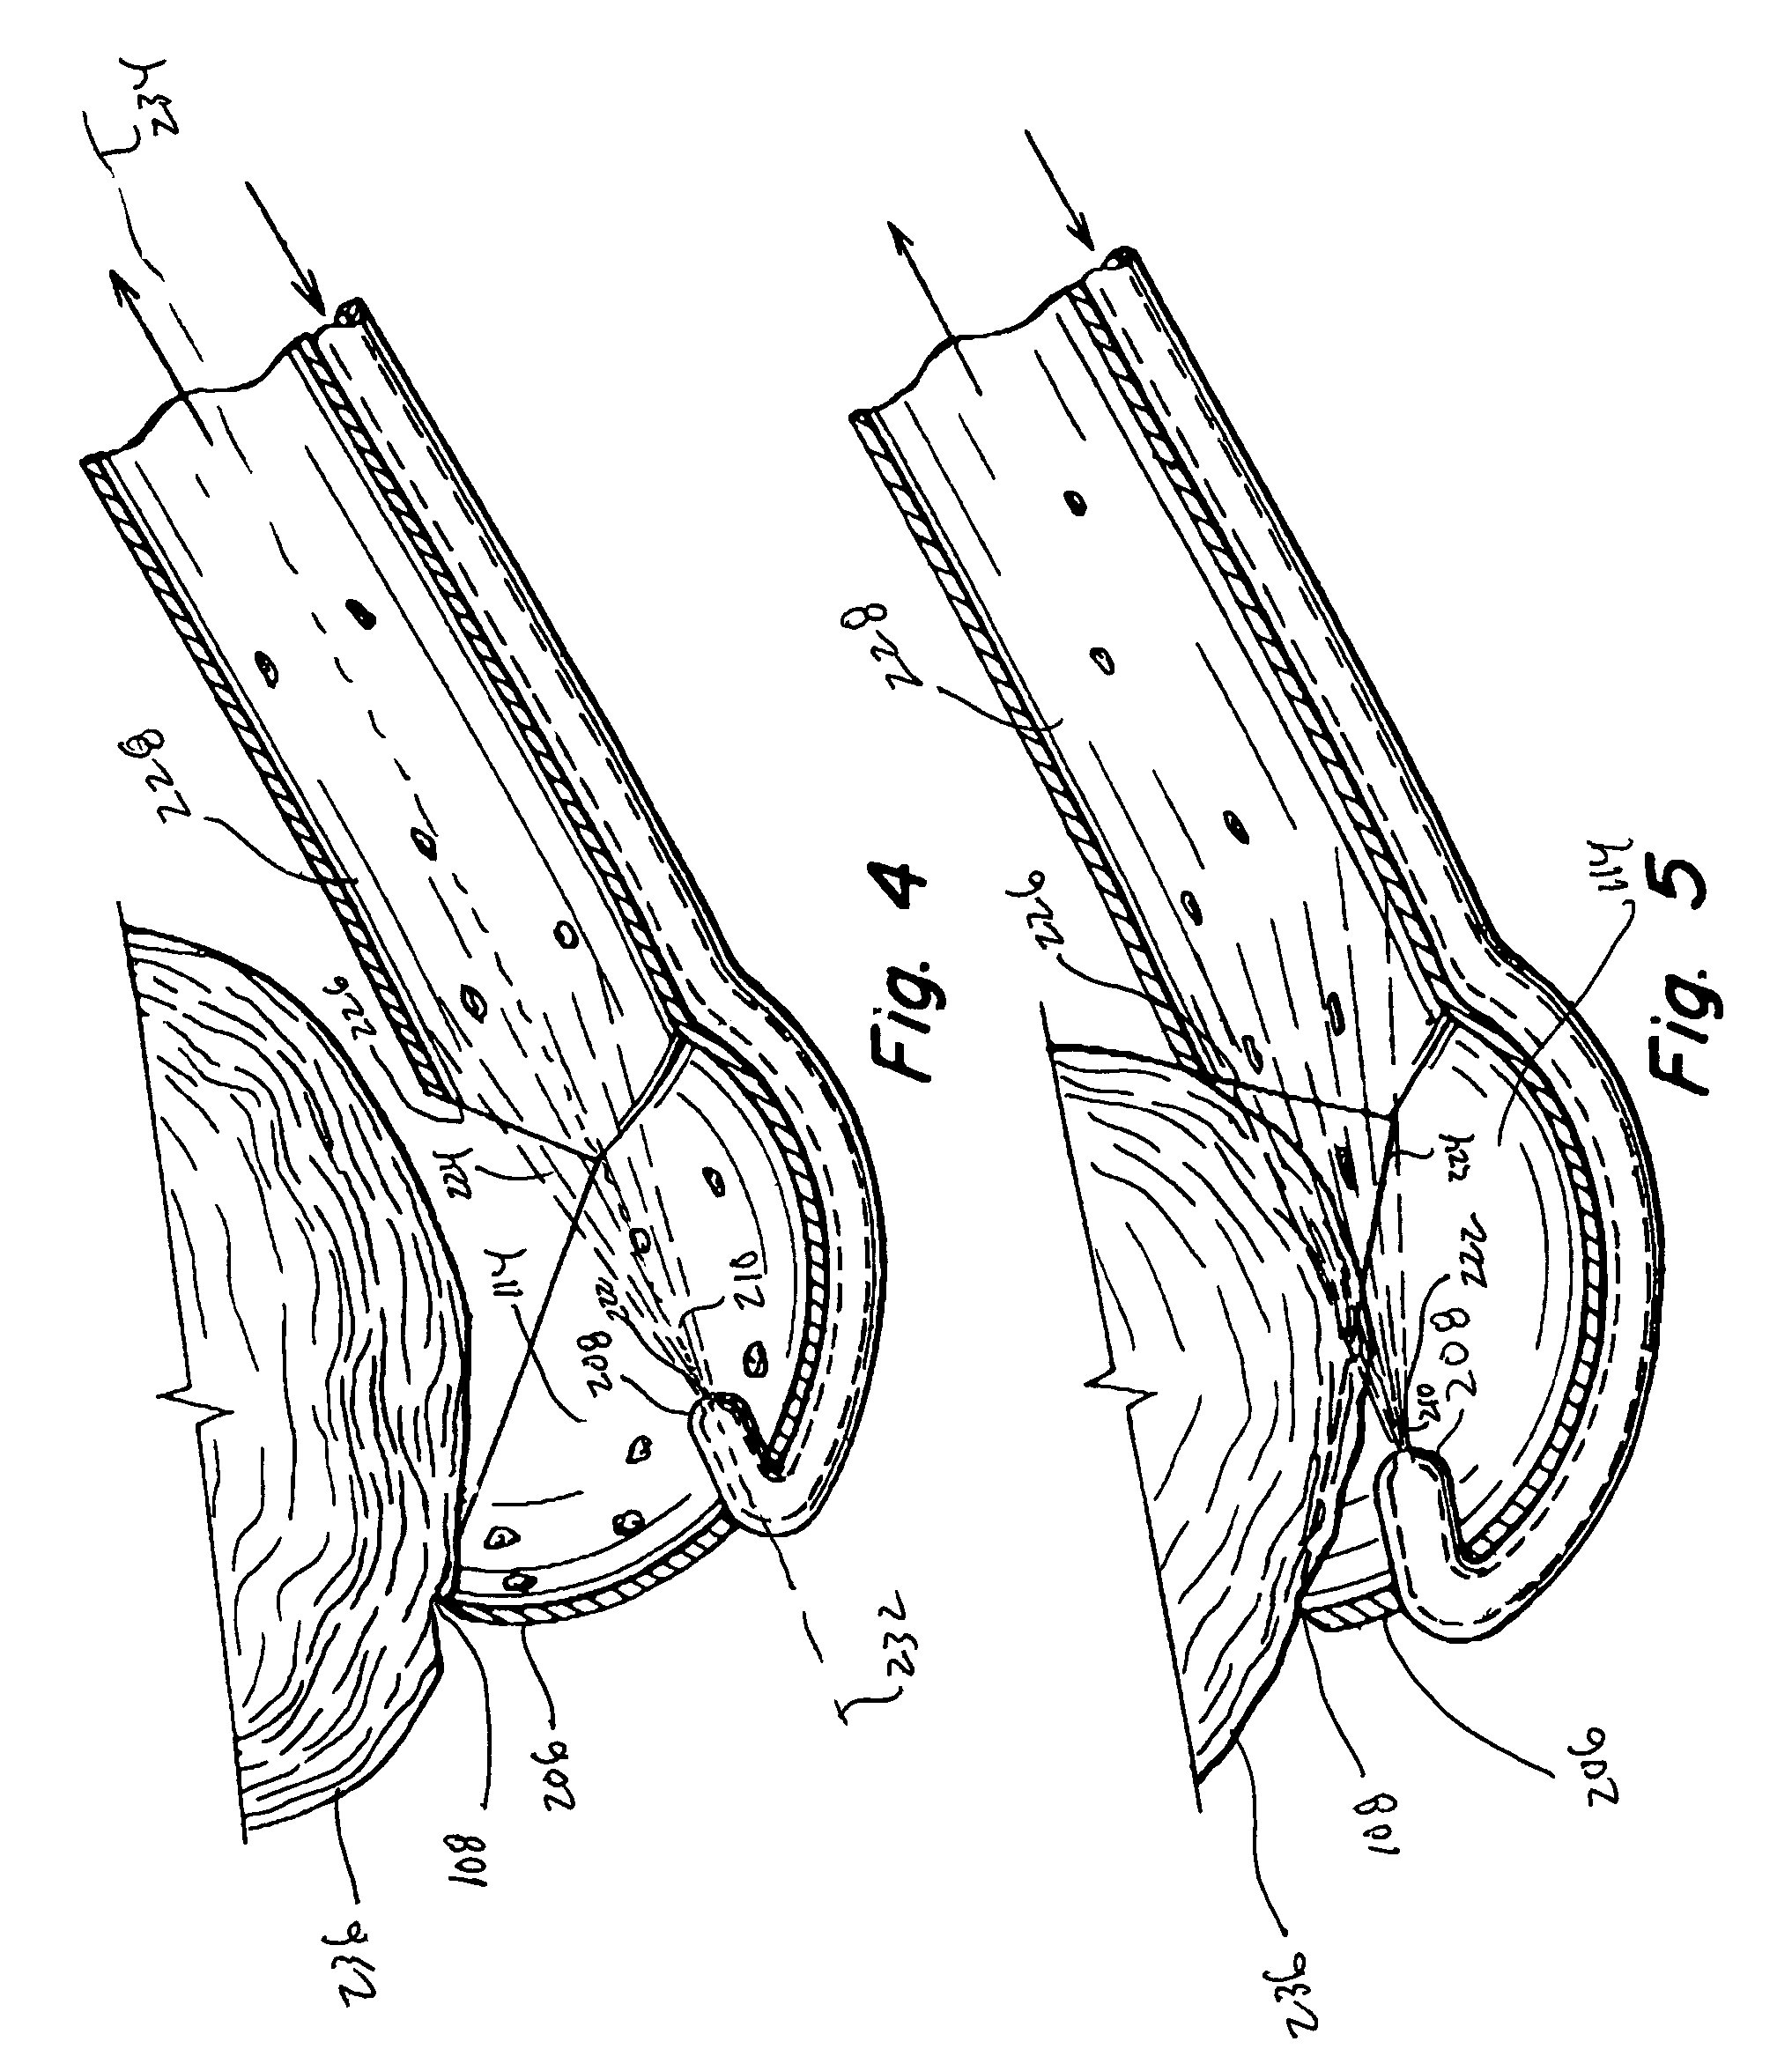 Surgical devices incorporating liquid jet assisted tissue manipulation and methods for their use